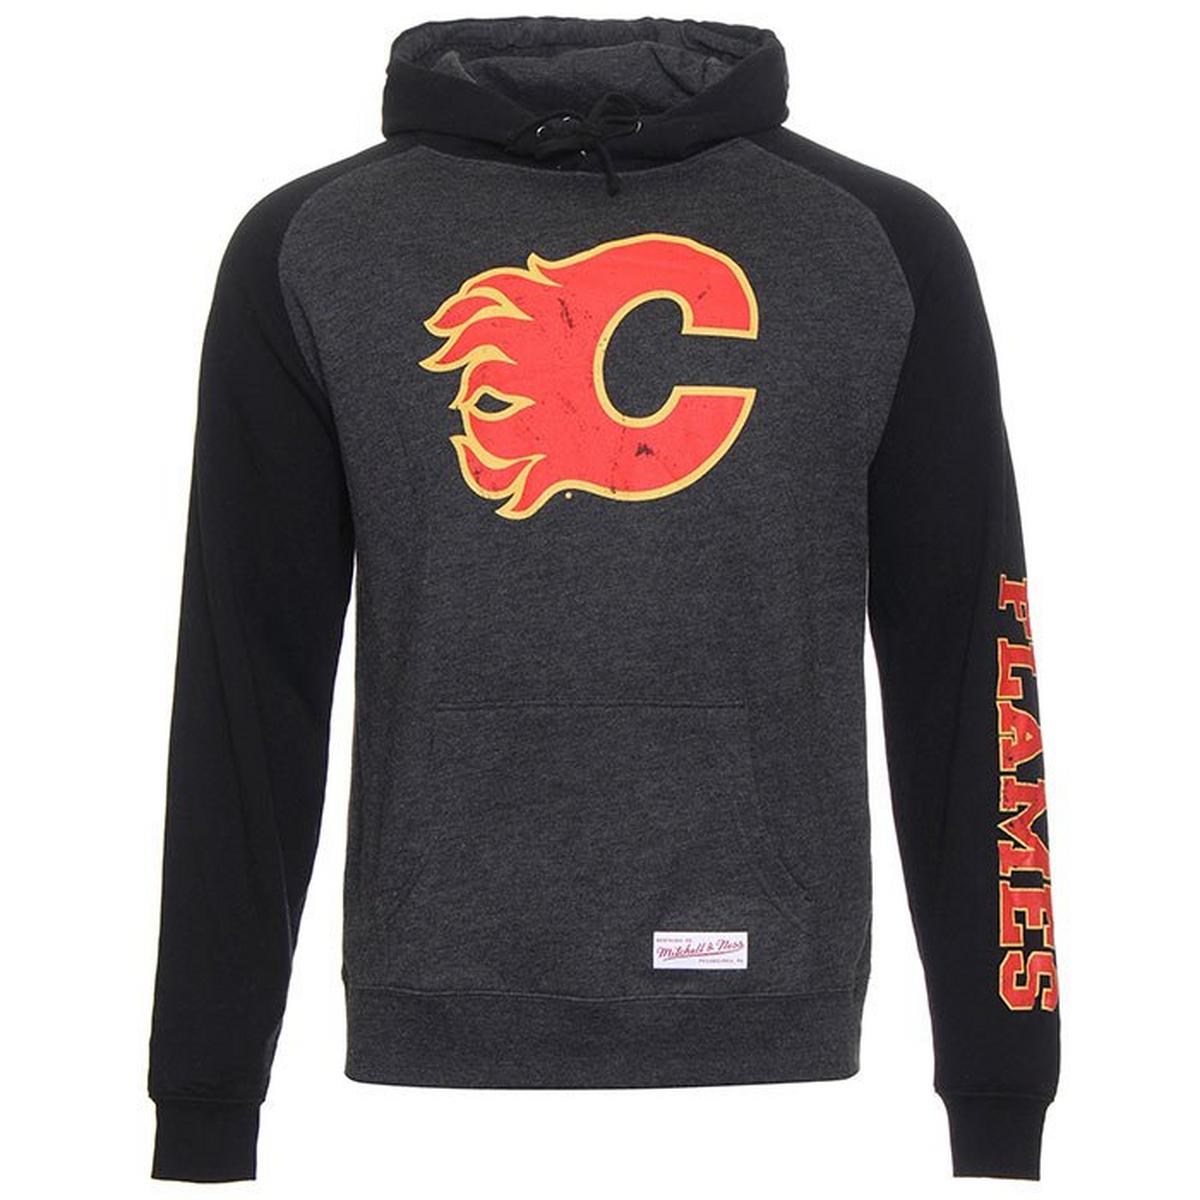 Men's Calgary Flames Graphic Pullover Hoodie